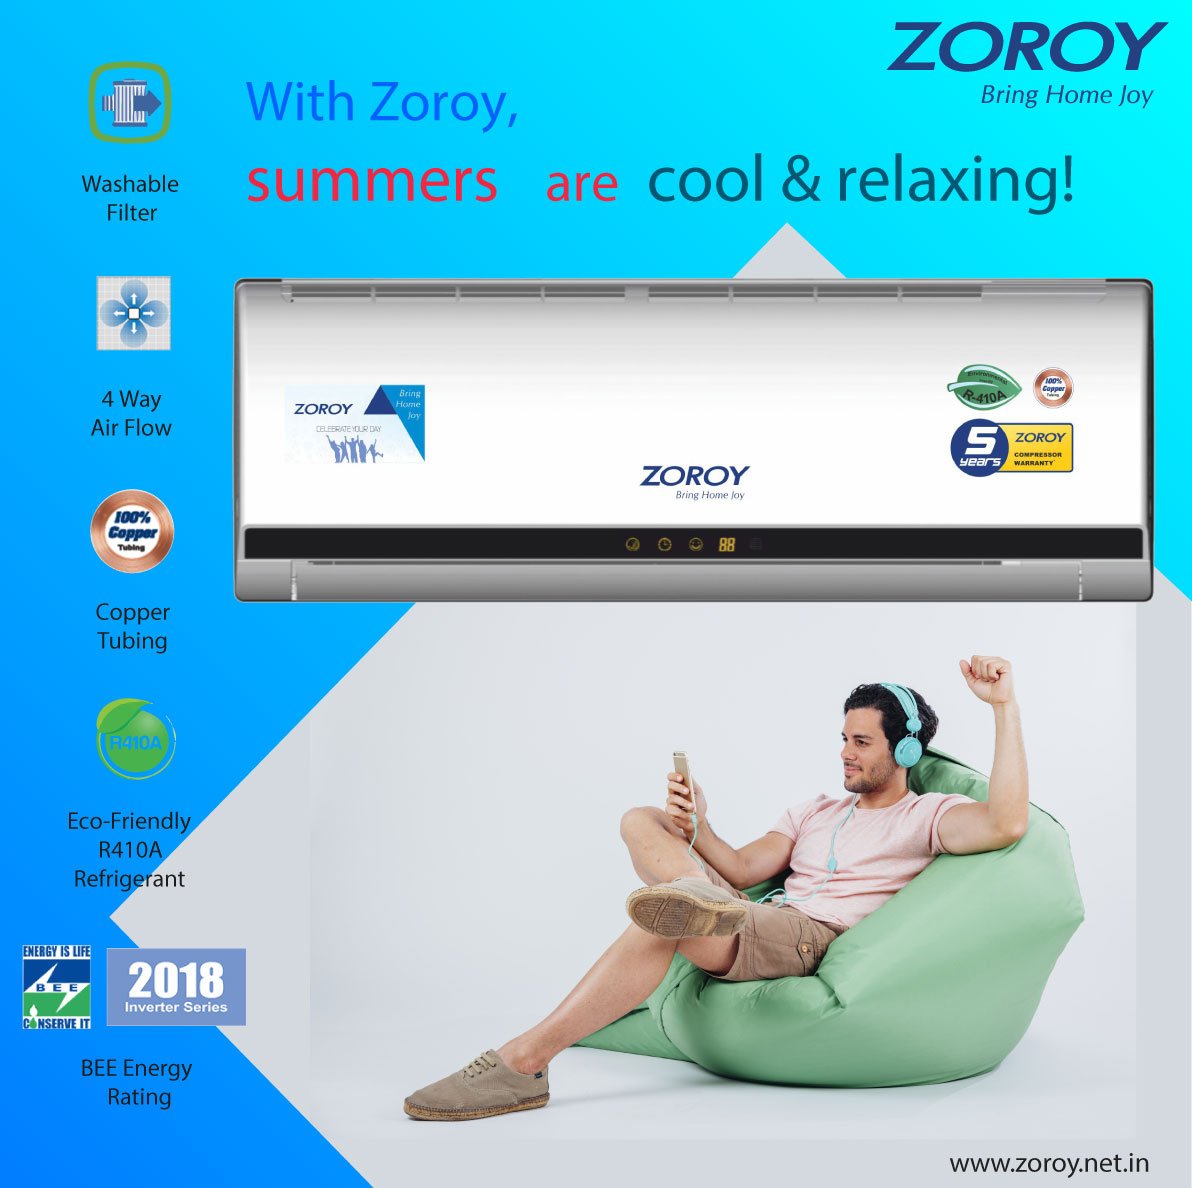 Clear the stifling heat with freshening Zoroy air; bring home the coolest Zoroy Air Conditioners Catch us Online@ zoroy.net.in Call @ 1800 103 3634 #airconditioners #ac #electronics #household #homeappliances #deal #sale #gadgets #device #shopping #consumerelectronics